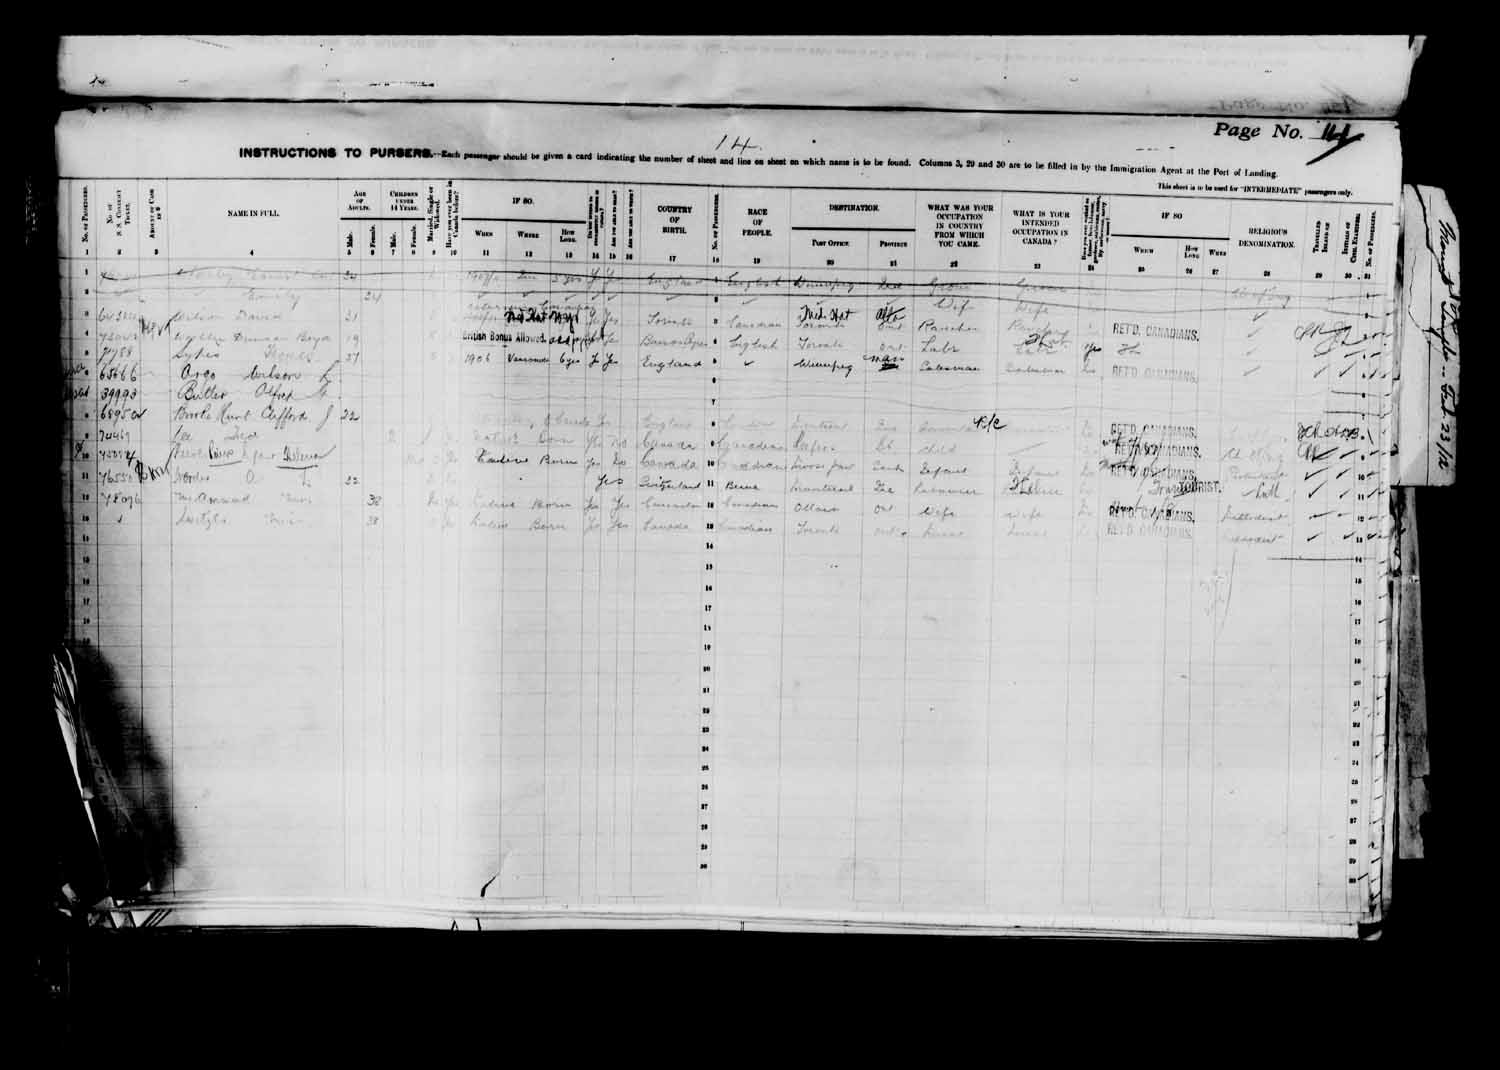 Digitized page of Passenger Lists for Image No.: e003627187